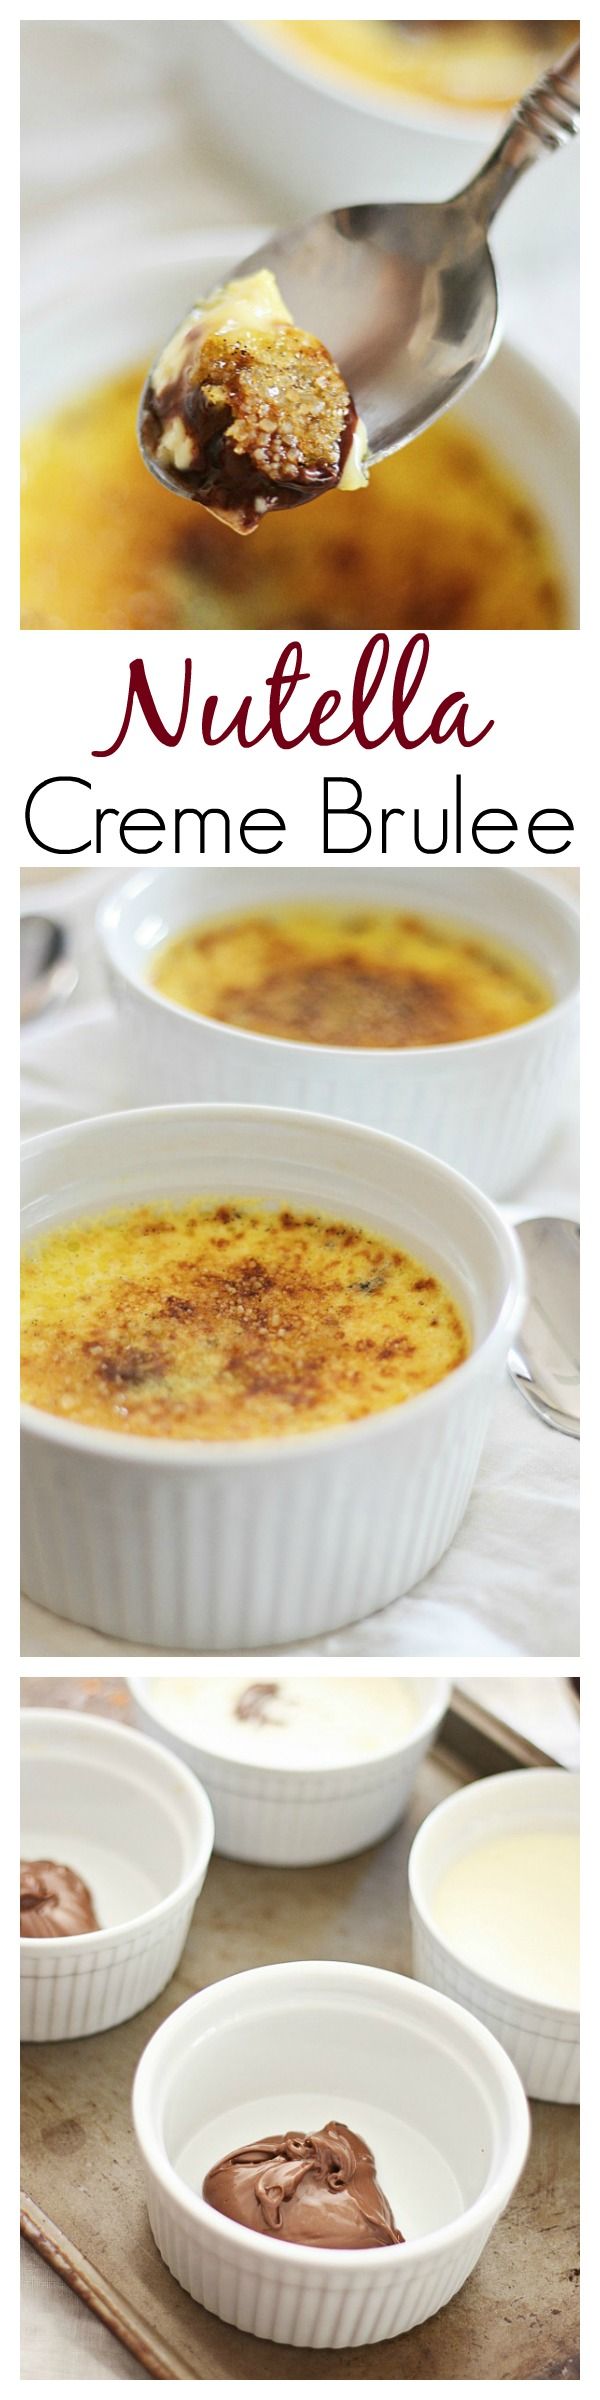 Nutella Creme Brulee recipe. Creamy and silky creme brulee with Nutella. Very spoonful of the creme brulee is sweet, nutty with gooey Nutella. A must-try | rasamalaysia.com